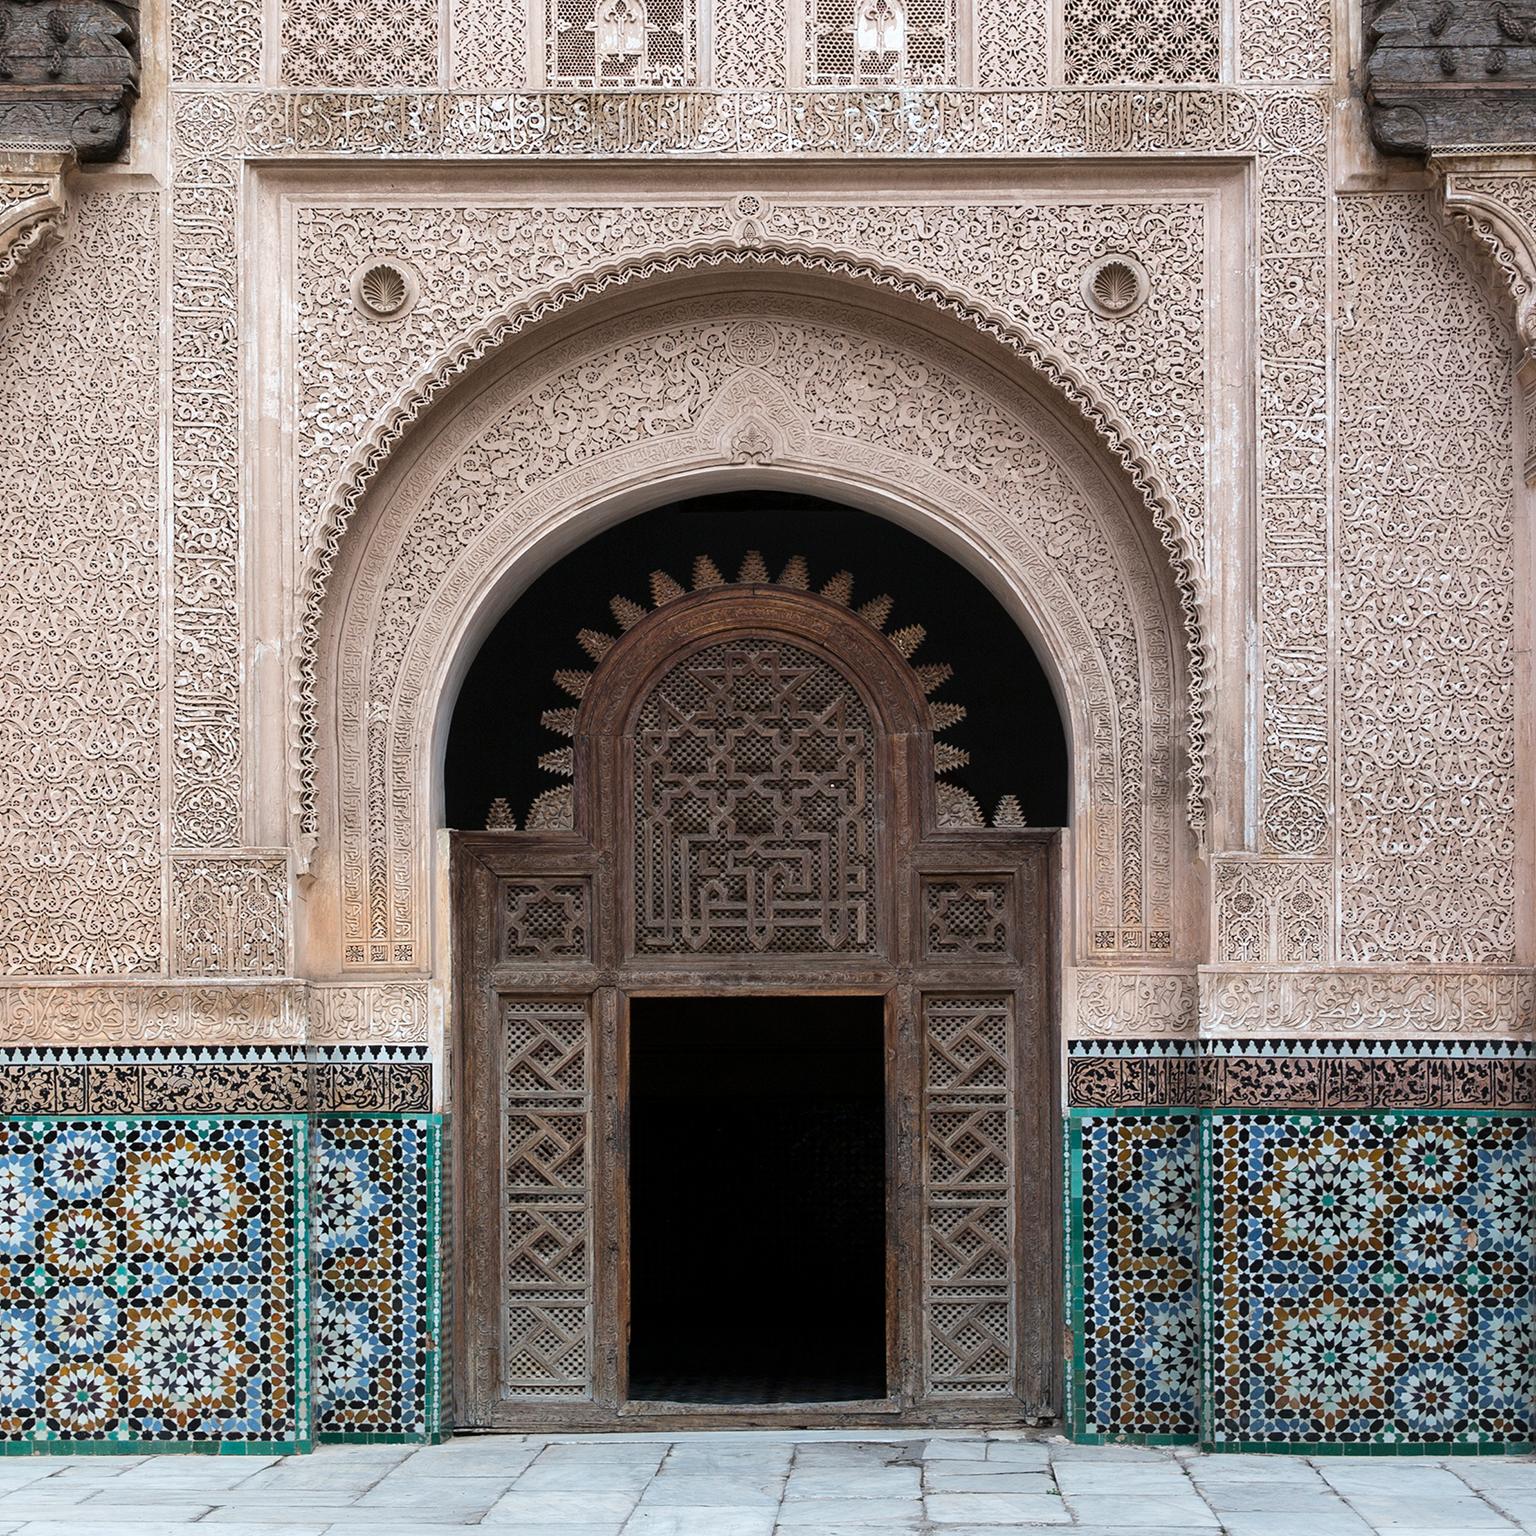 Islamic architectural detail of the Madrasa courtyard, Fez, Morocco, 2016 - Photograph by  Cosmo Condina